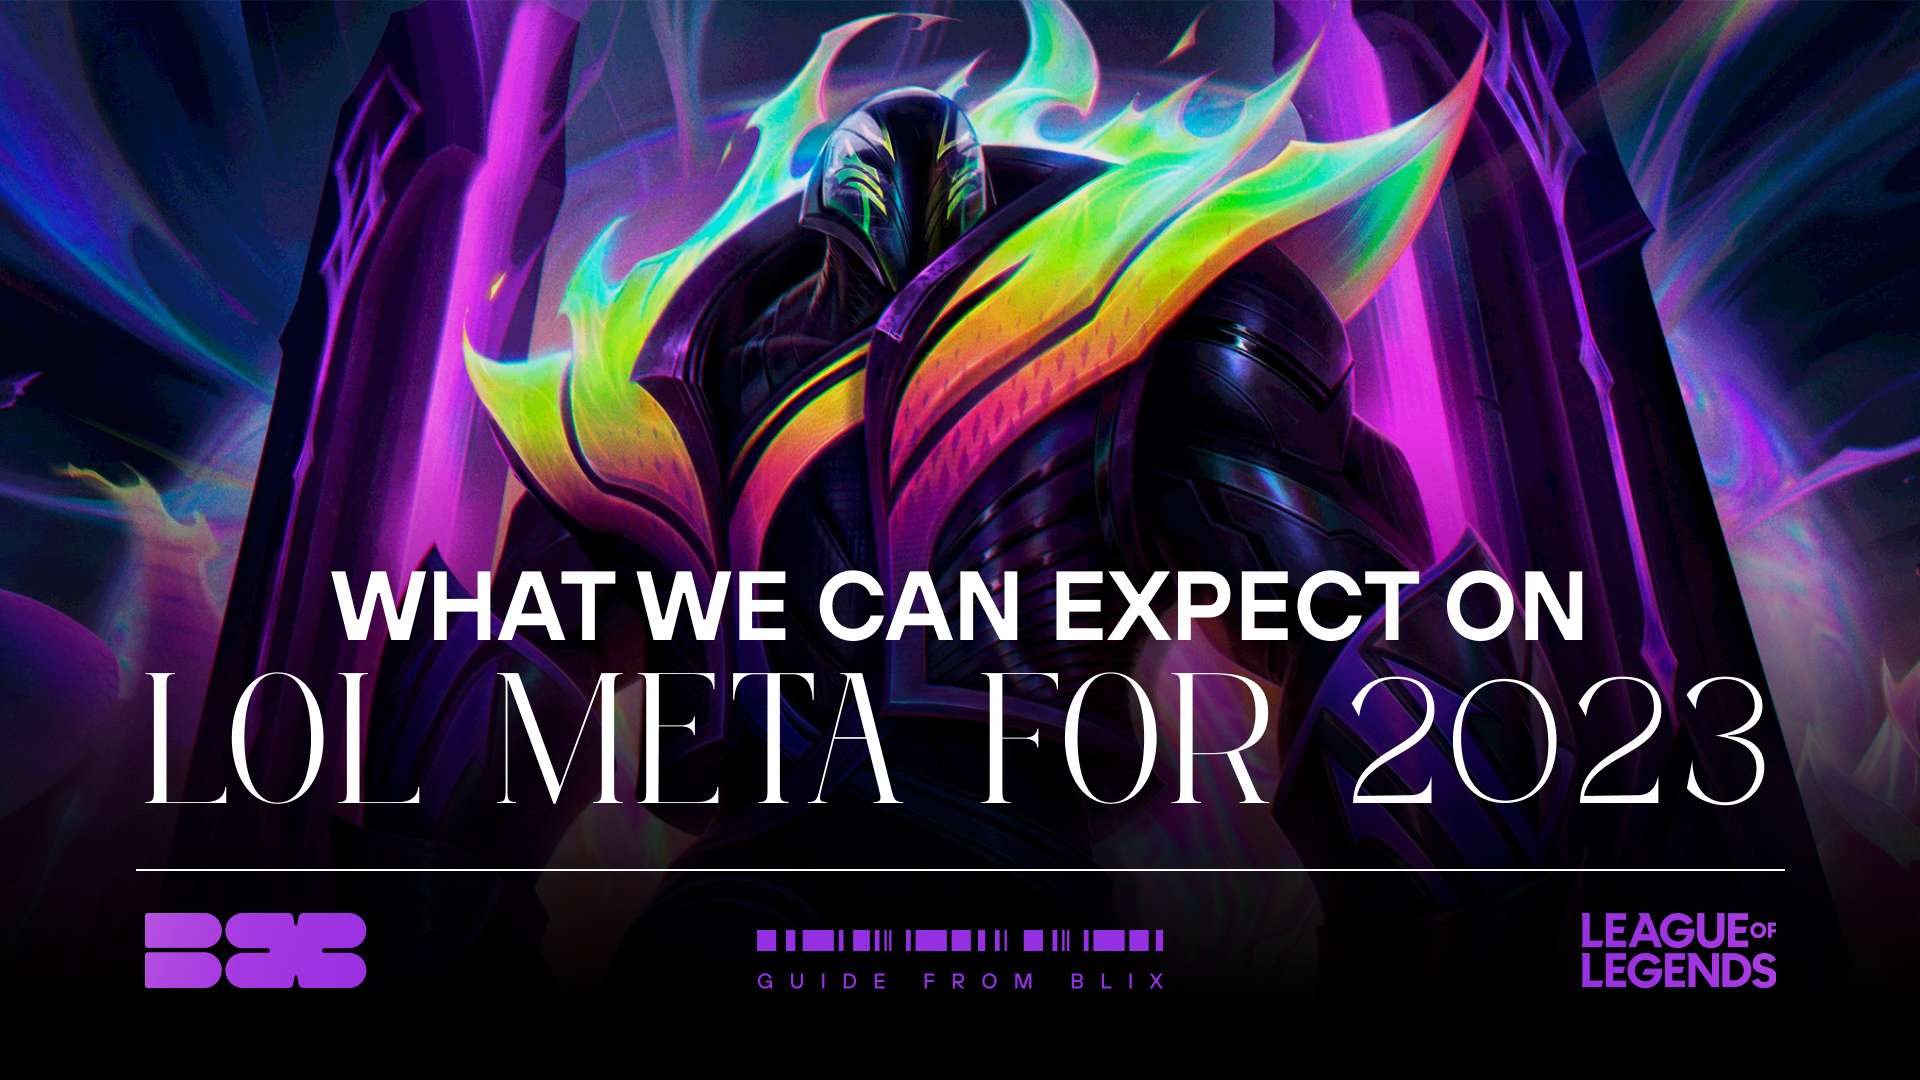 LoL Worlds Picks and Bans - What will the Meta be like in 2023?